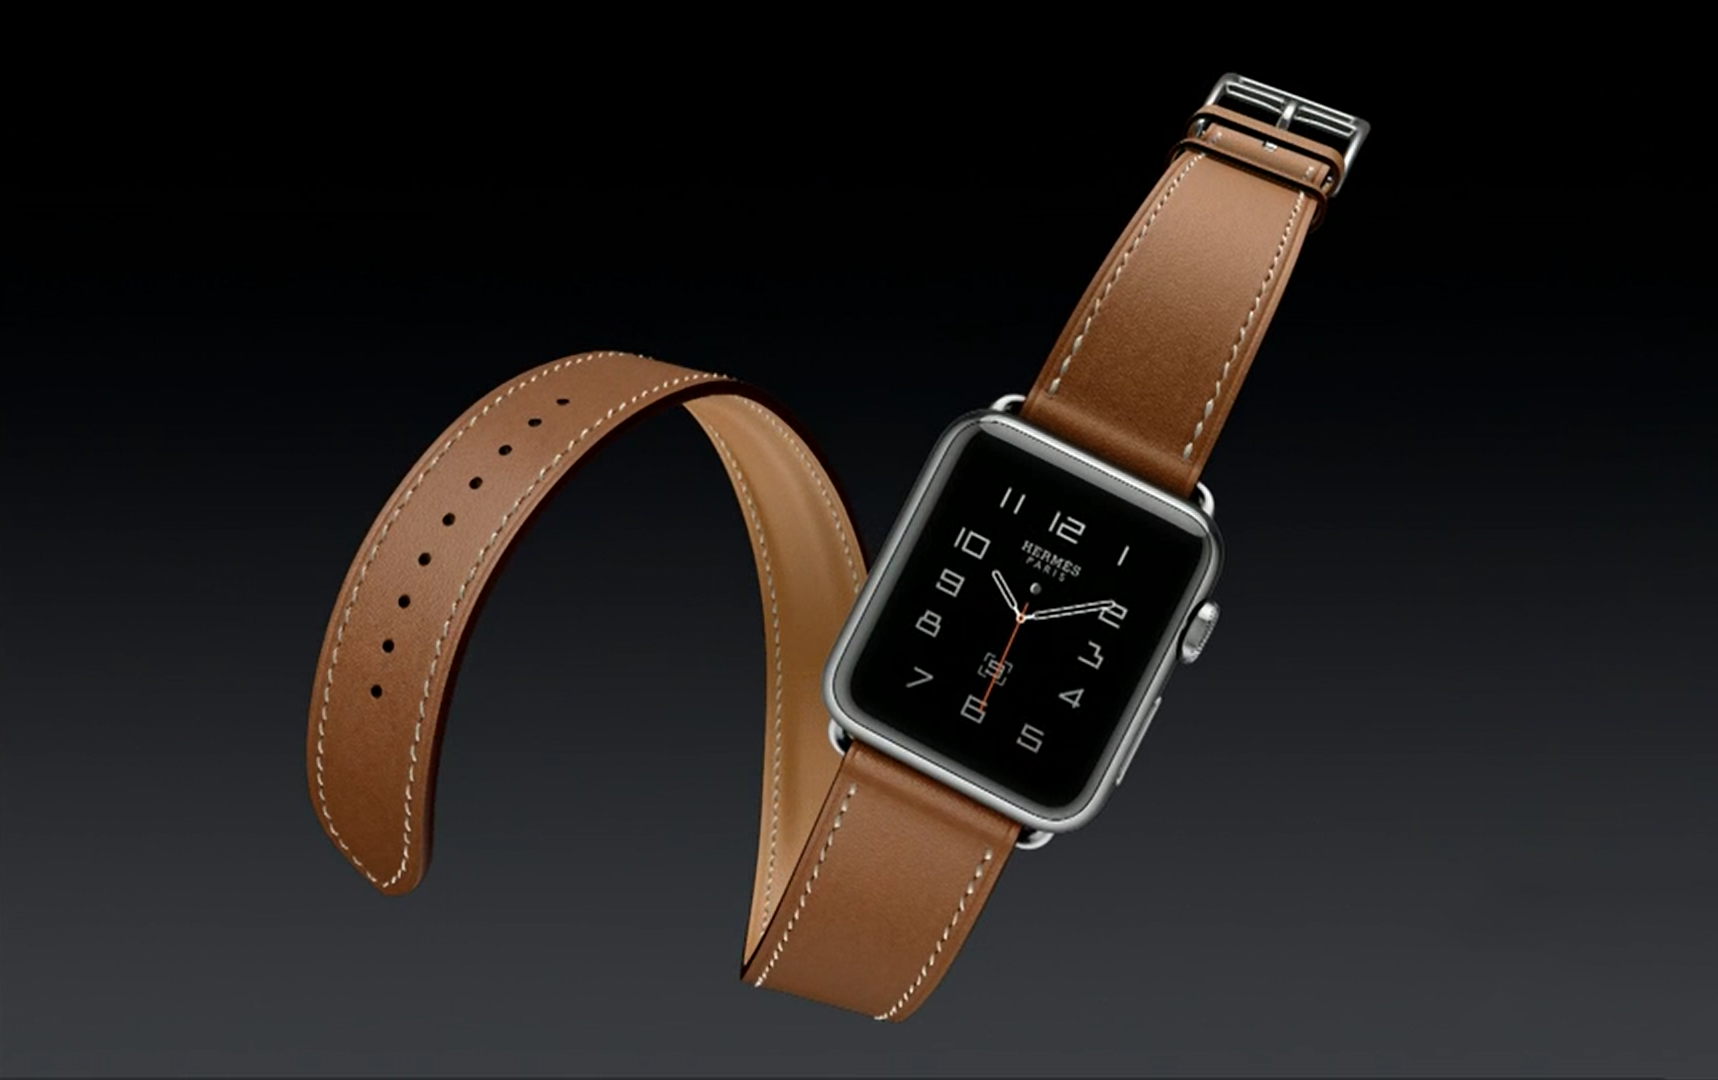 new apple watch models available today apple watch os 2 coming 16 september image 6